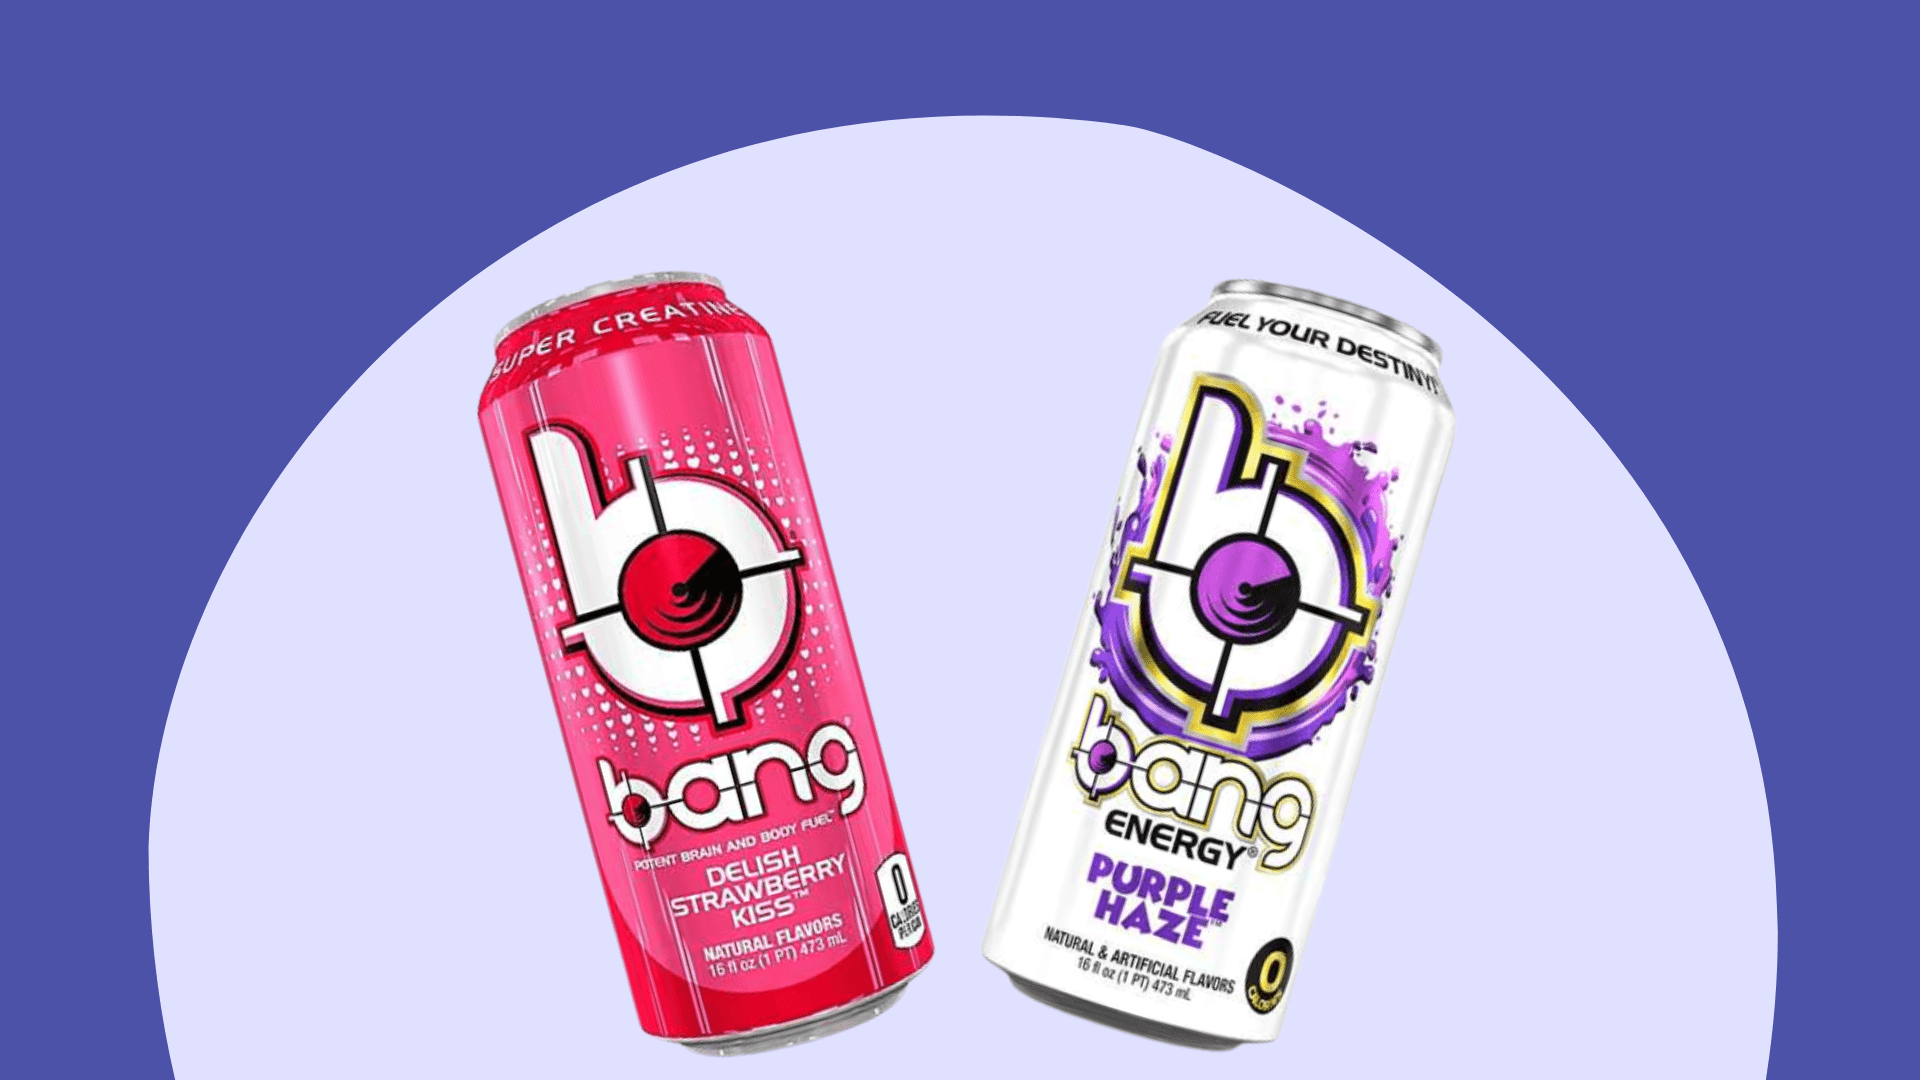 Bang Energy two drinks side by side in center